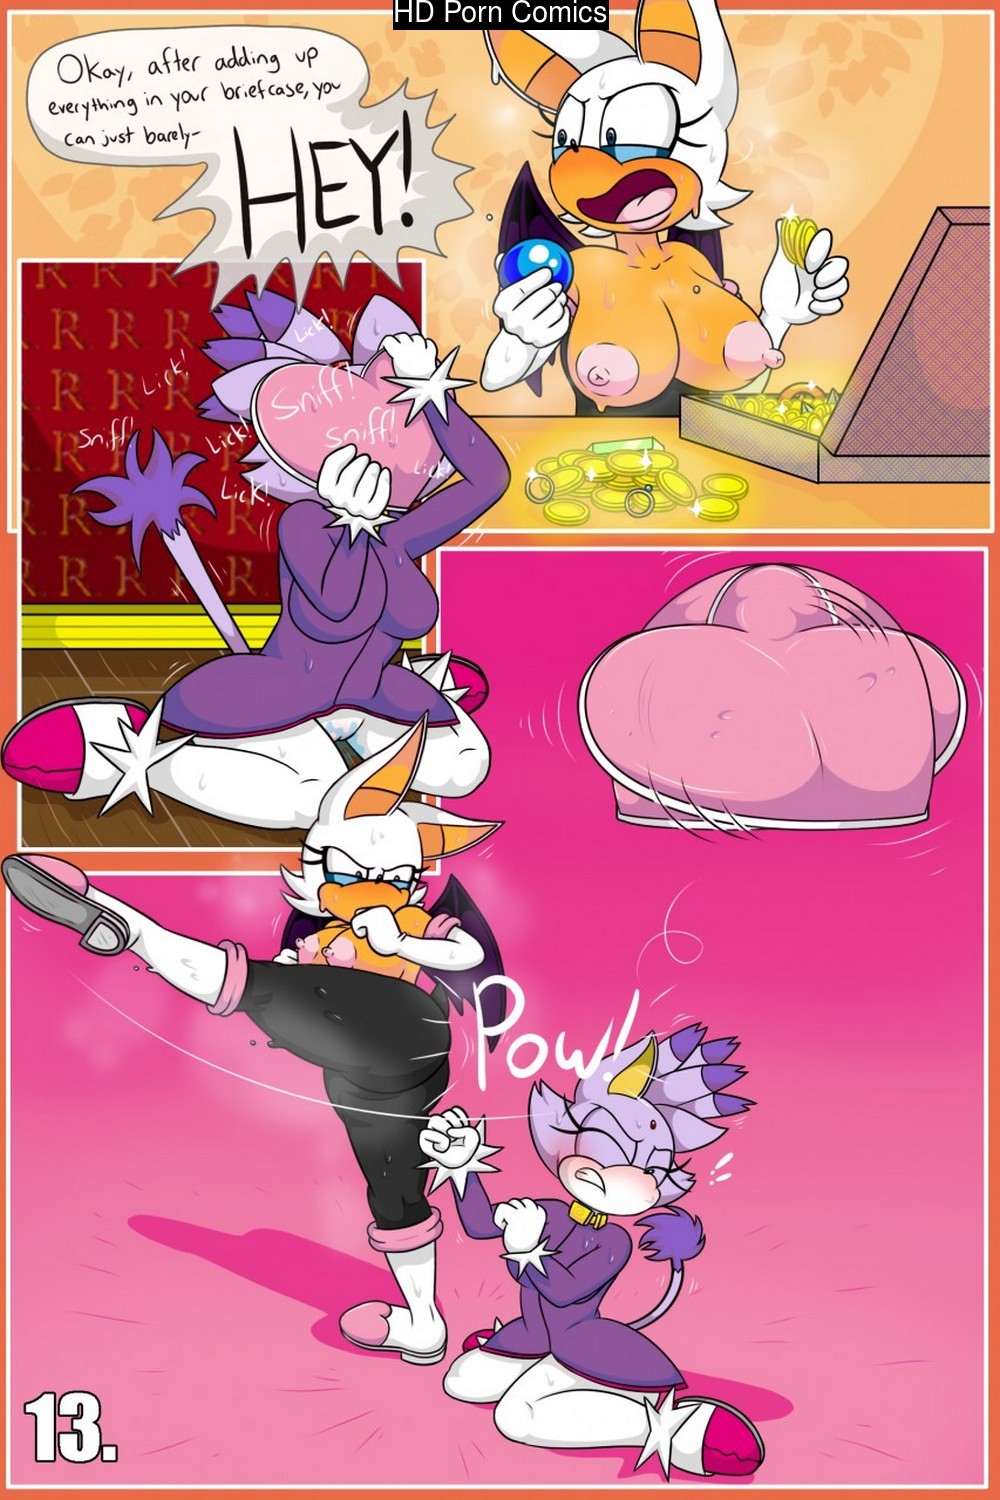 Rouge And Blaze In House Call comic porn - HD Porn Comics